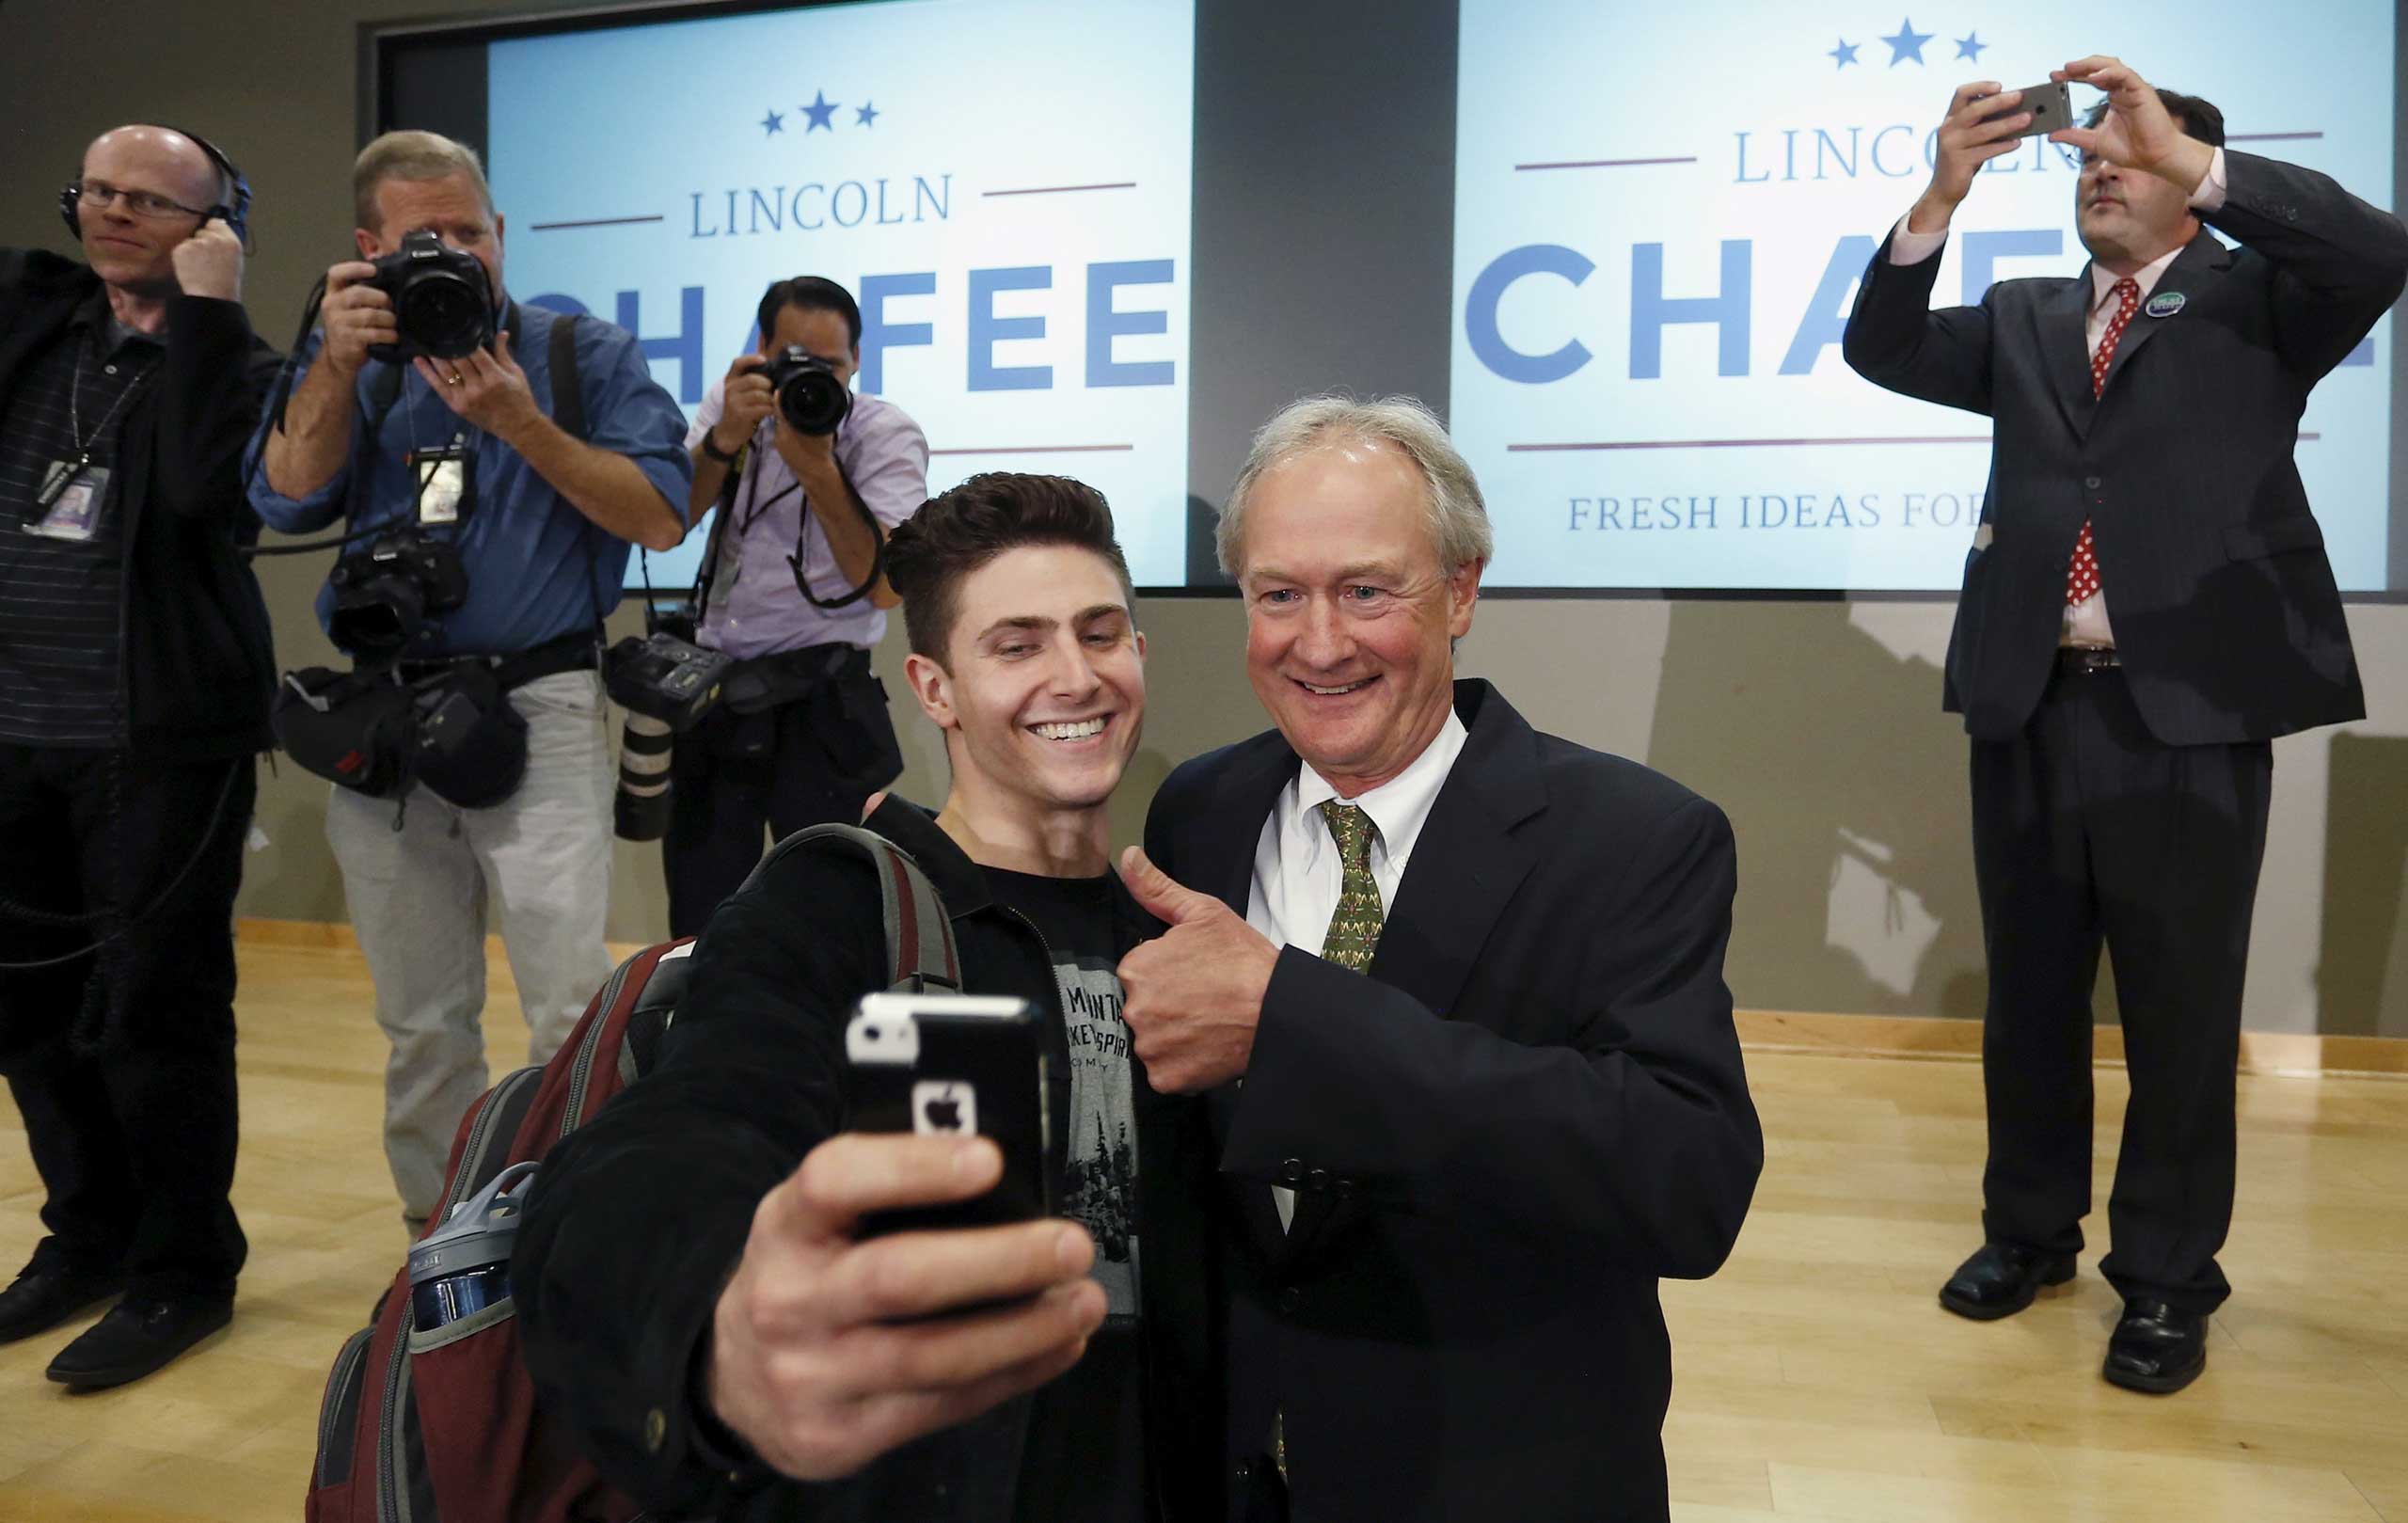 Former Rhode Island Governor Chafee poses for a selfie with a student after announcing he will seek the Democratic nomination to be U.S. president during an address to the GMU School of Policy, Government, and International Affairs in Arlington